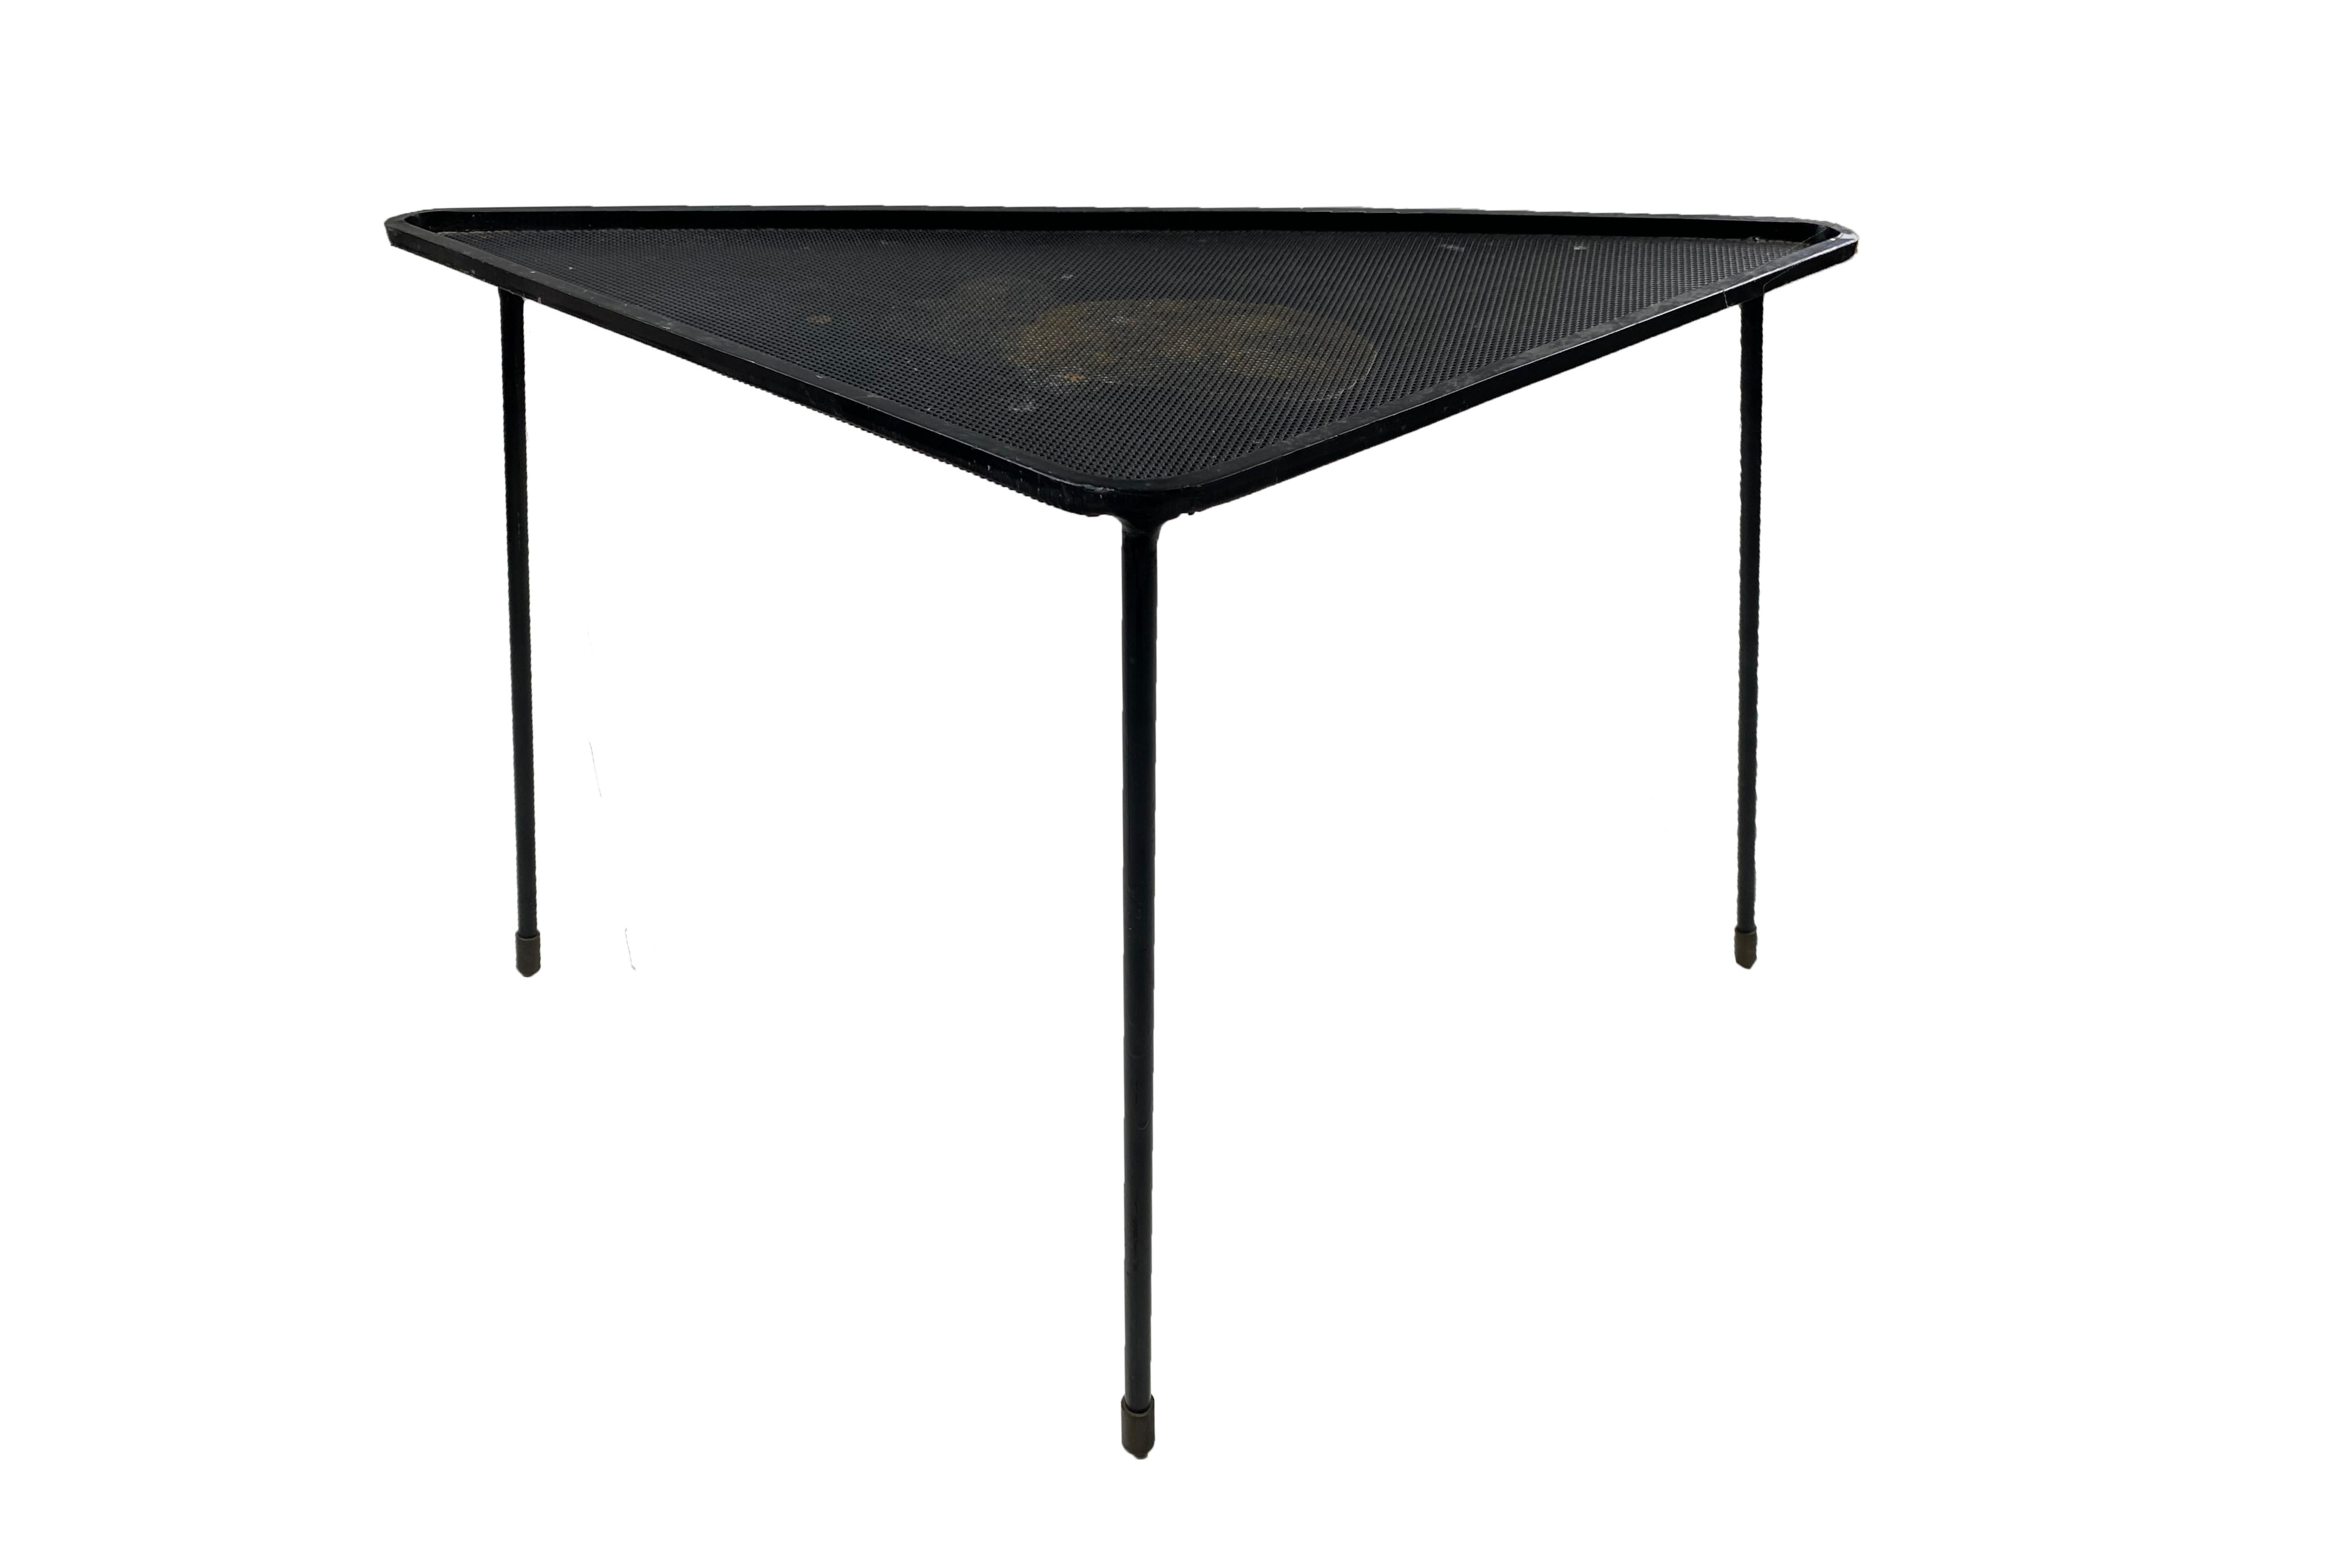 Mathieu Matégot triangle side table.
Made with lacquered performated metal.
Circa 1950, France.
Very good vintage condition.
Matégot was born on 4 April 1910 at Tápió-Sully, a village about 20 kilometres (12 mi) from Budapest in Hungary. He